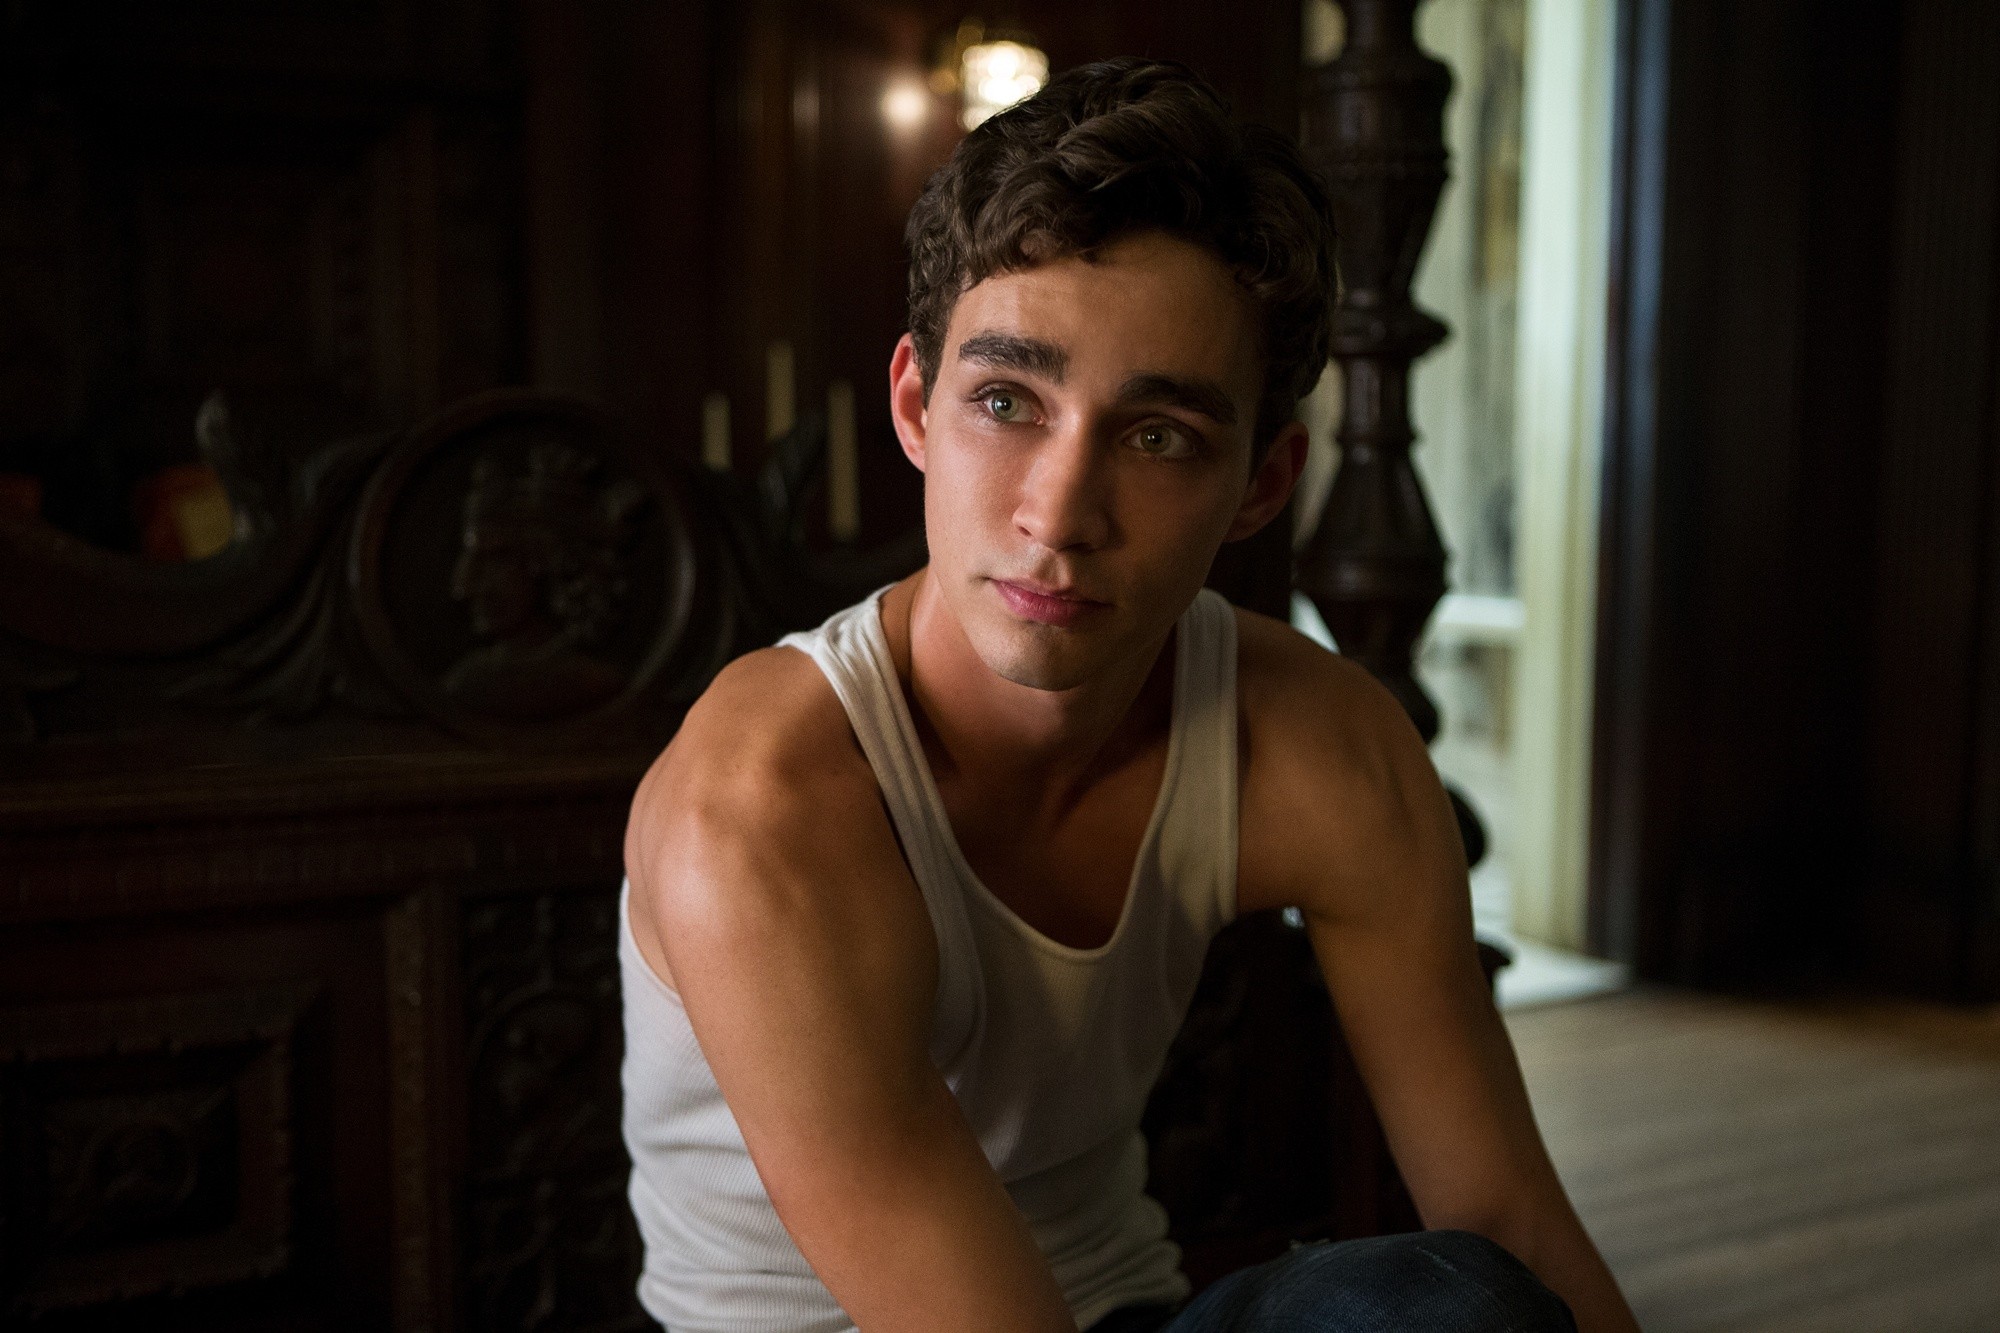 Robert Sheehan stars as Simon Lewis in Screen Gems' The Mortal Instruments: City of Bones (2013). Photo credit by Rafy.